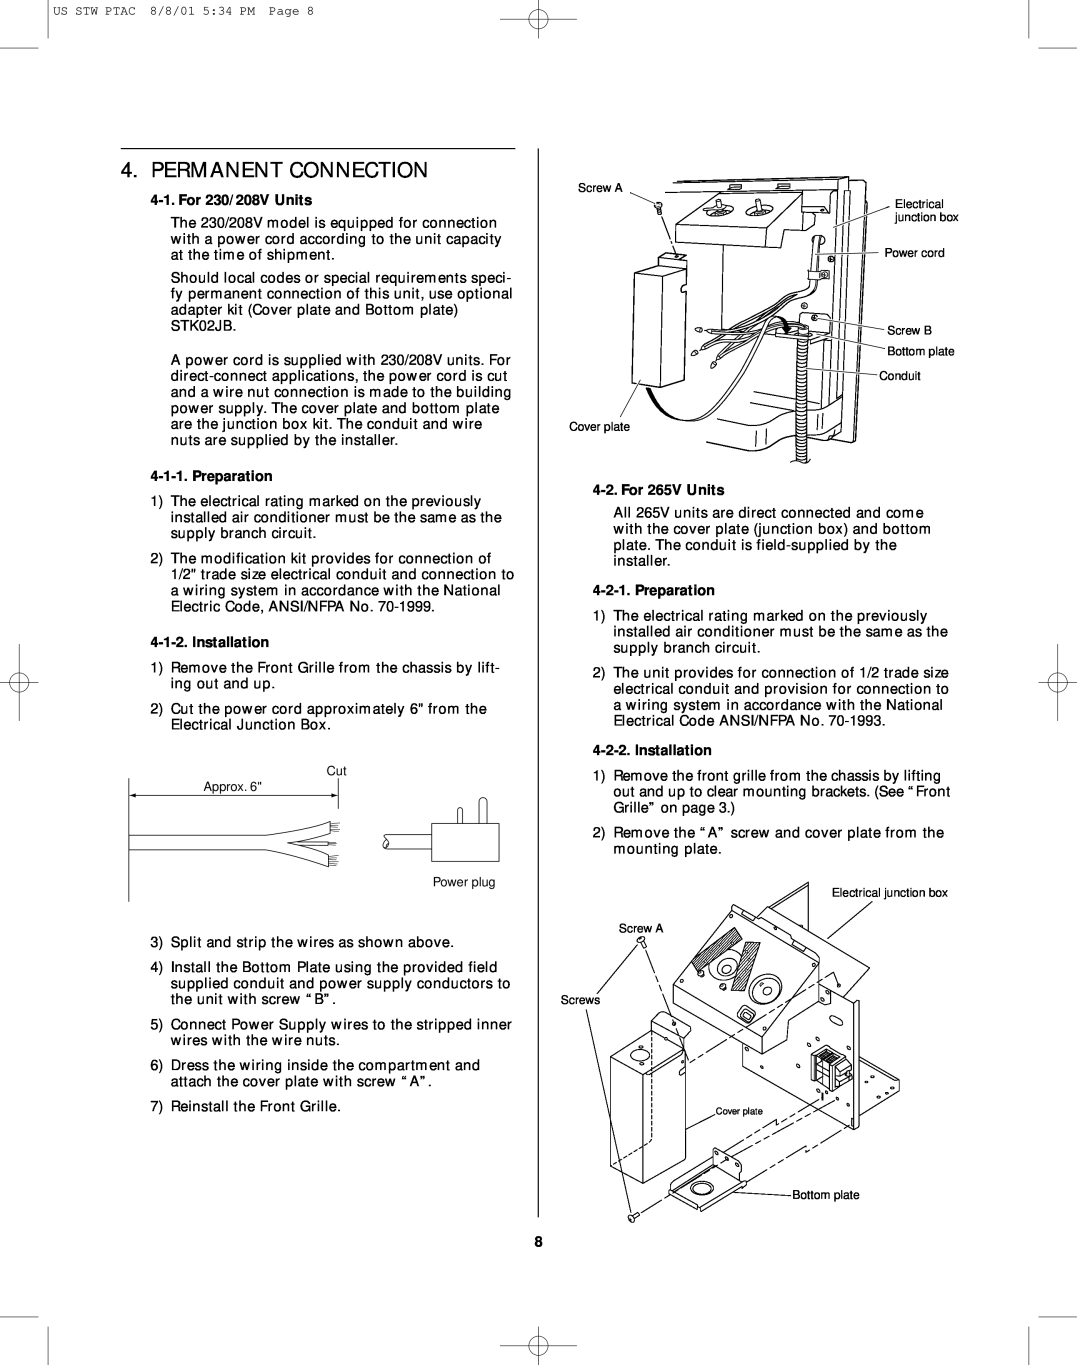 Sanyo STW-2 owner manual Permanent Connection, For 230/208V Units, Preparation, Installation, For 265V Units 